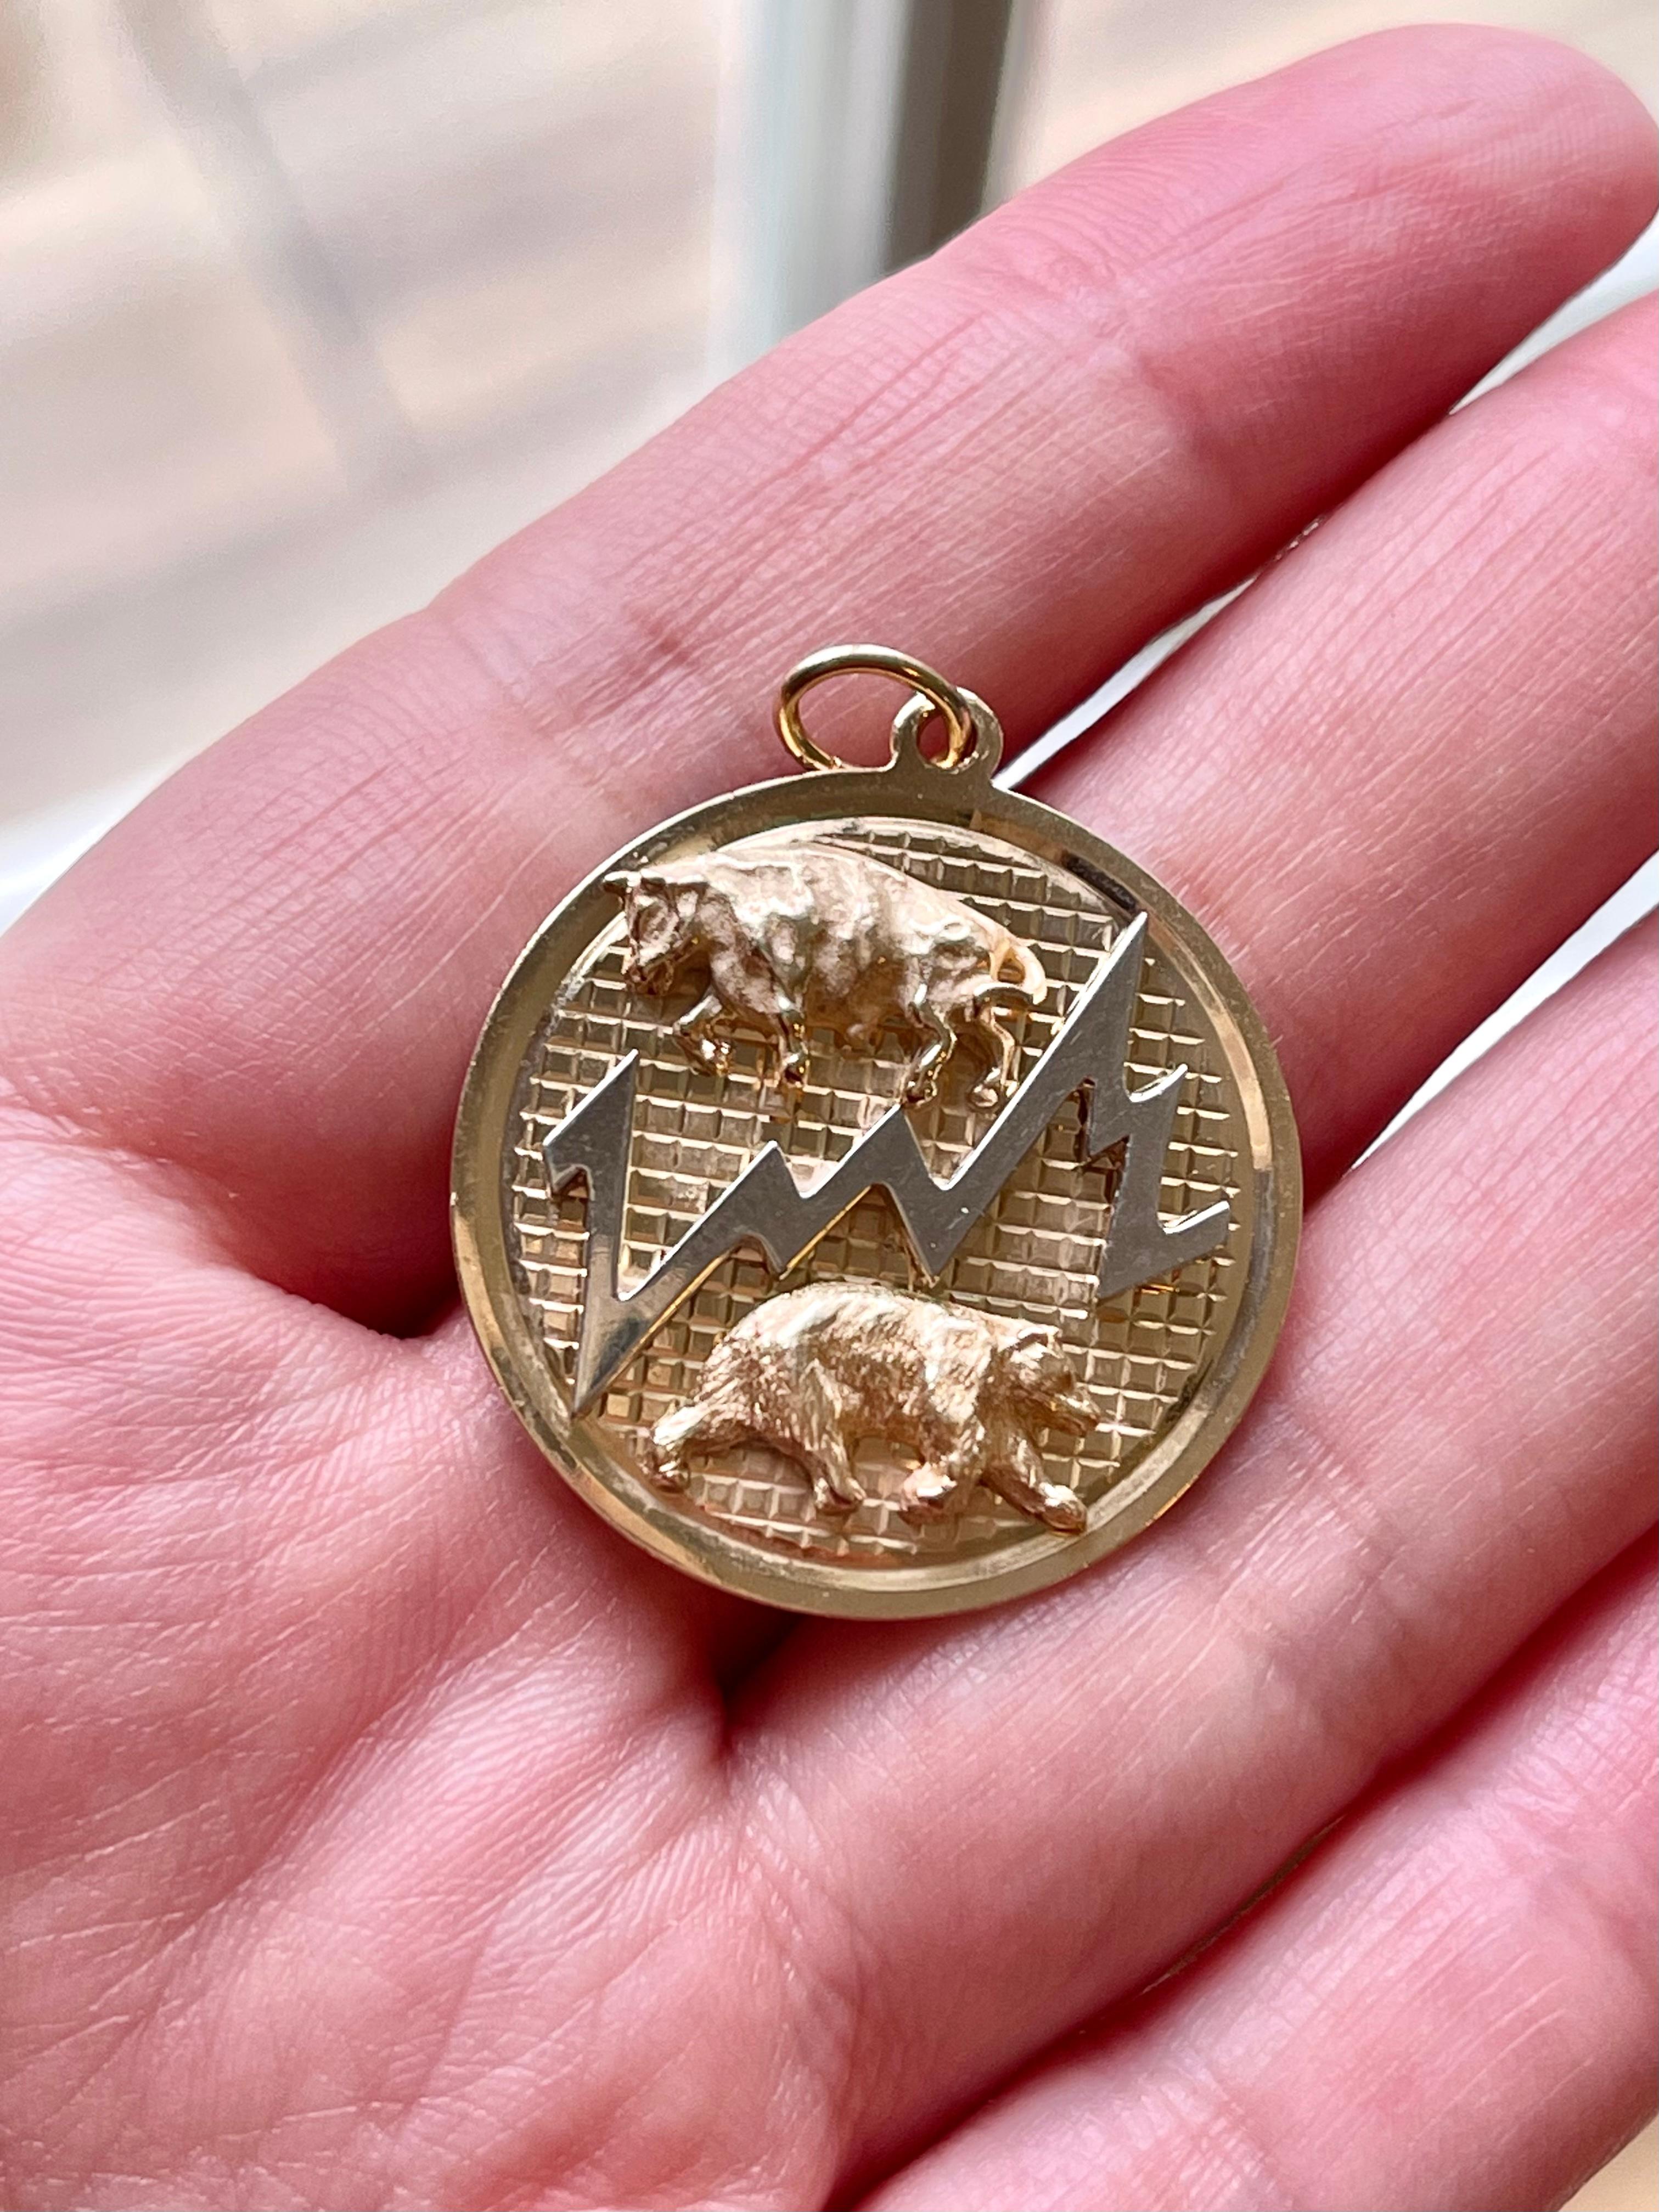 A rare vintage 14k gold charm depicting a bull and bear referring to the stock market by Dankner circa 1950. The charm is 1 inch in diameter. 8.9 grams.